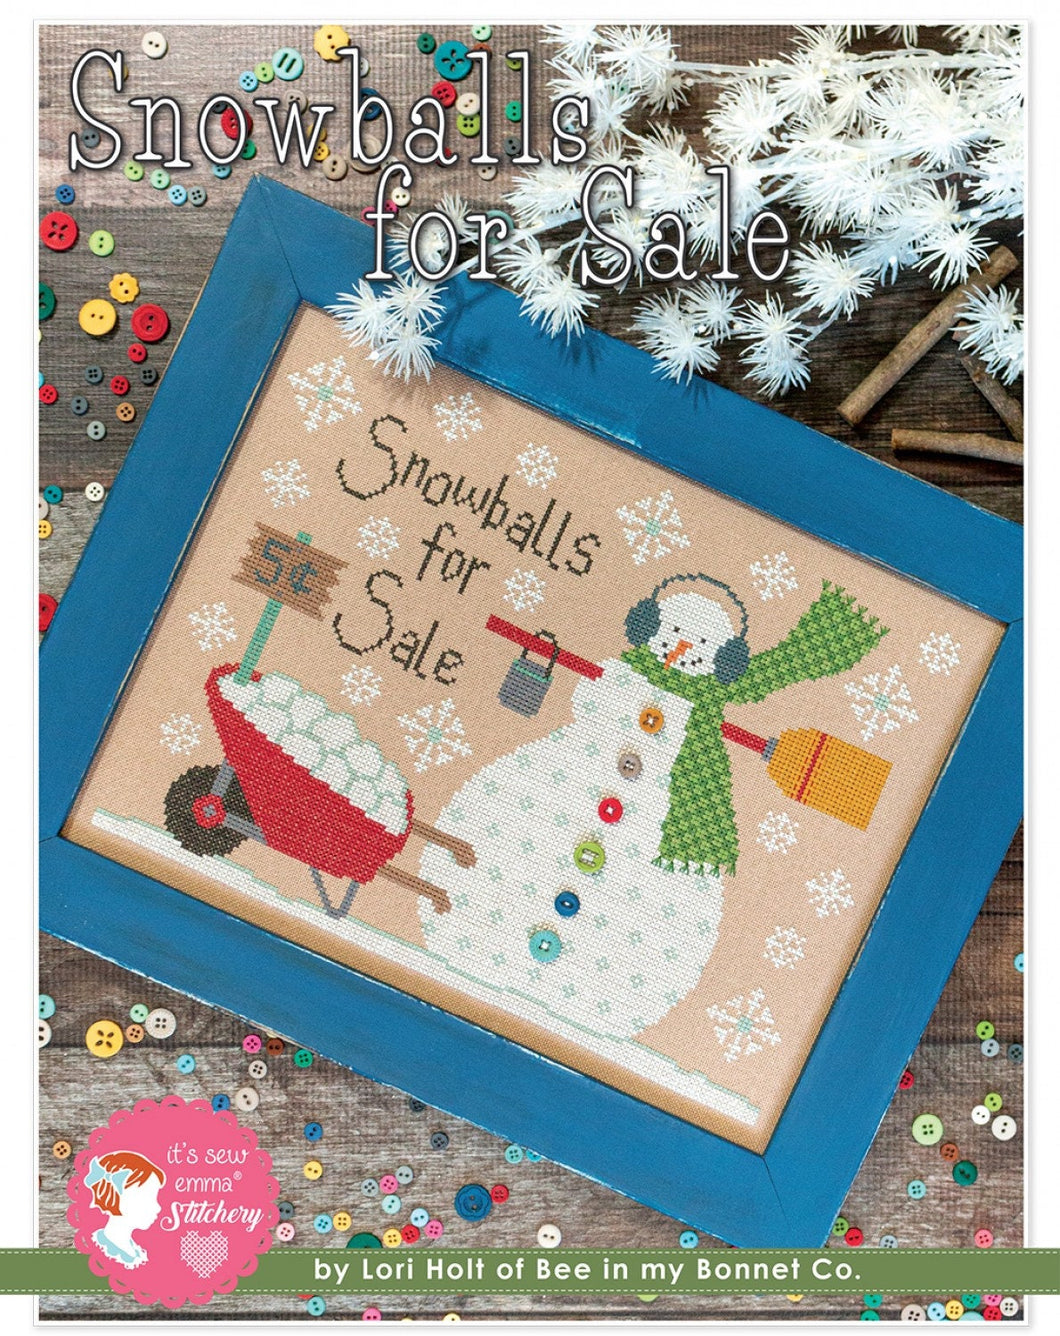 Snowballs for Sale Cross Stitch Pattern by Lori Holt of Bee in my Bonnet Co. Stitch It Up VA